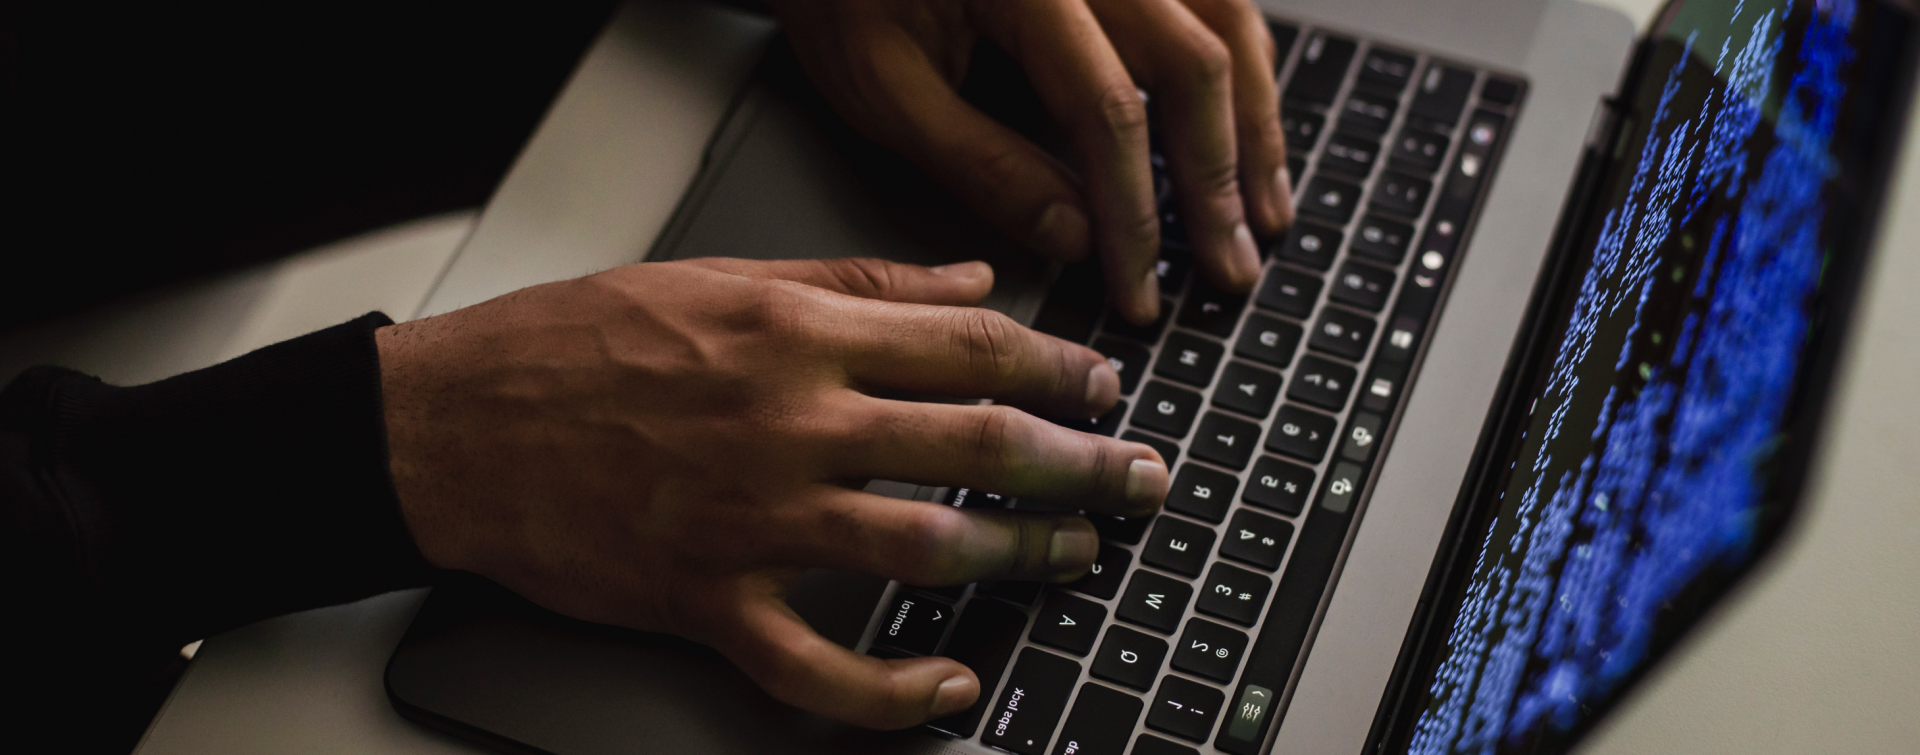 Hands typing on a keyboard, emphasizing cybersecurity, security audits, and bug bounty programs.